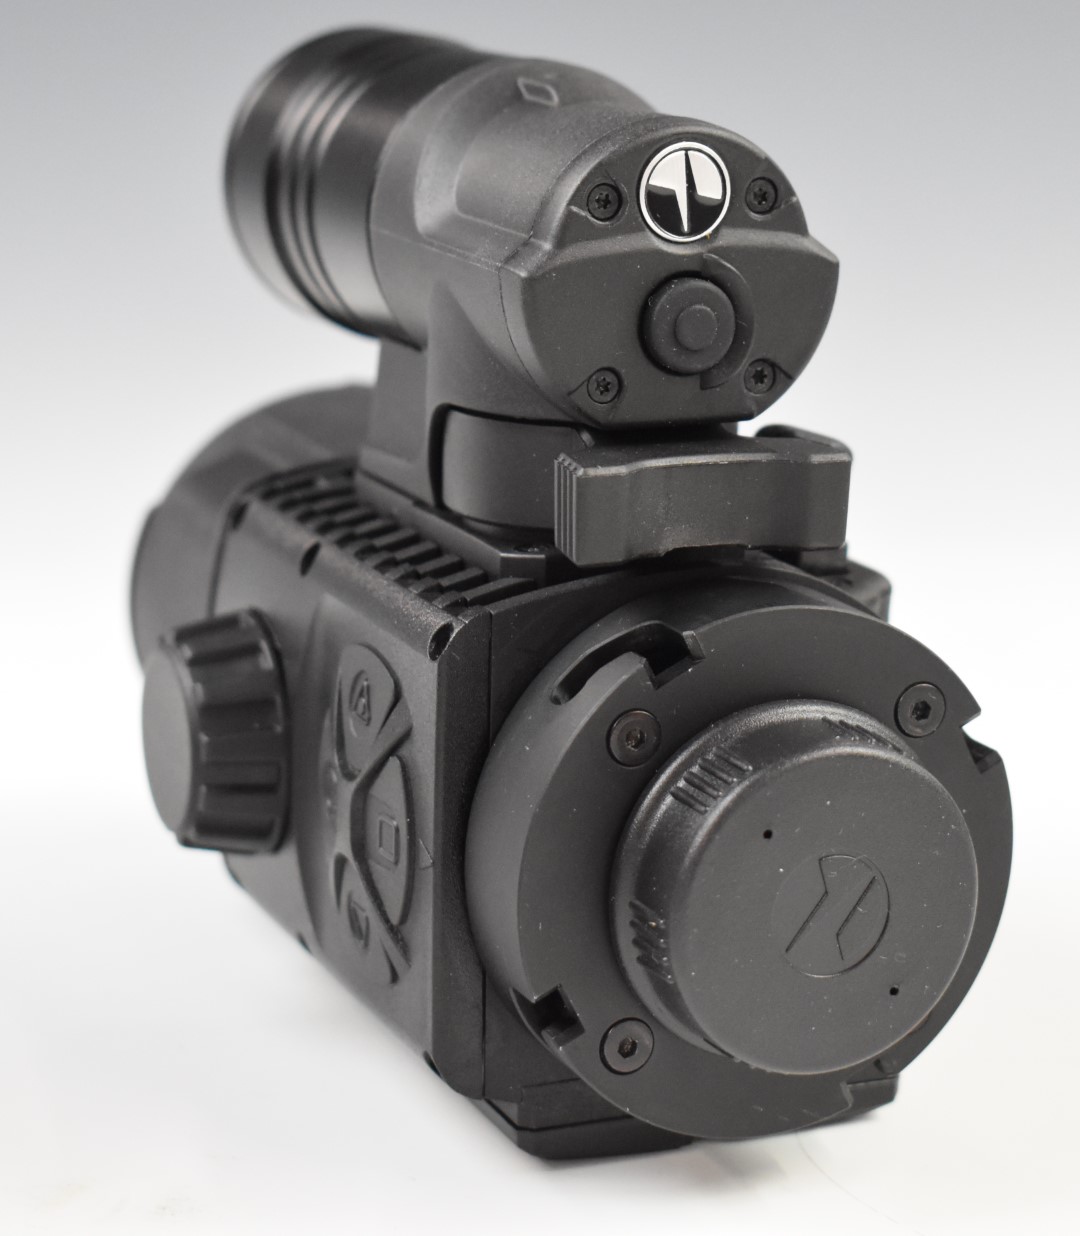 Pulsar Forward F455 digital night vision attachment to suit air rifle or similar scope, in - Image 4 of 10